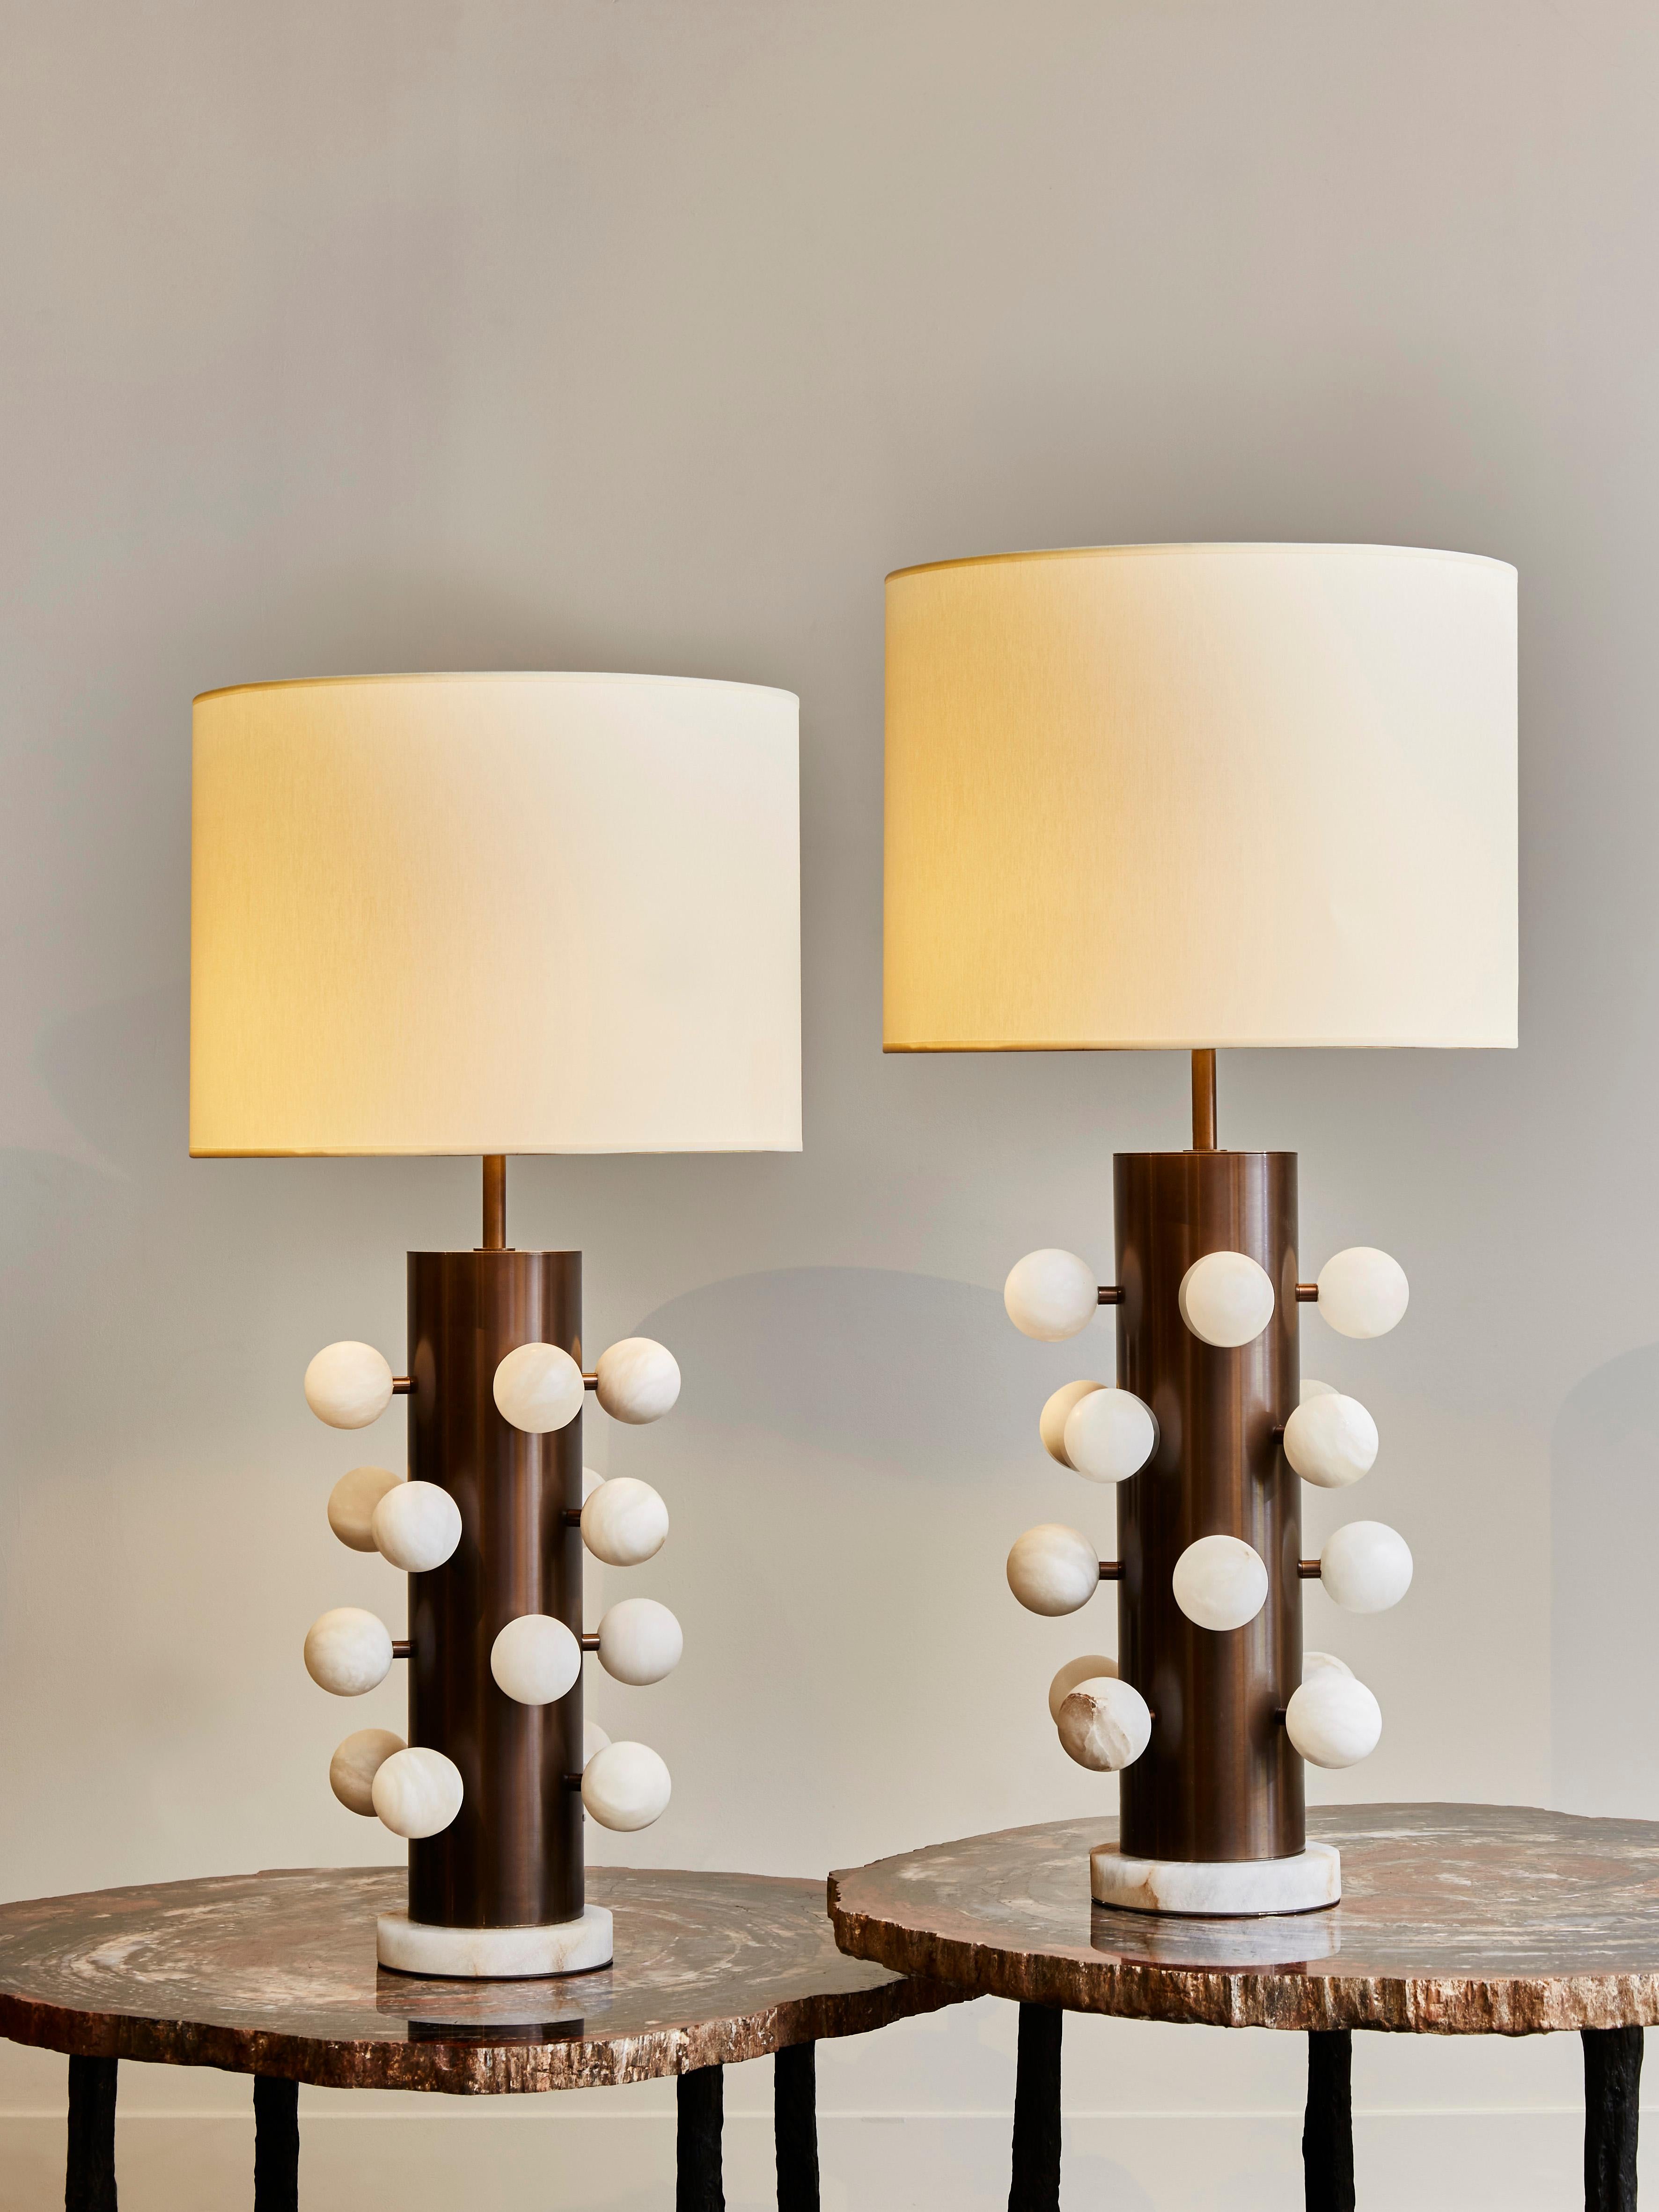 Pair of table lamps made of light bronze finished brass body, and alabaster feet and decorative spheres attached all over the lamps.

